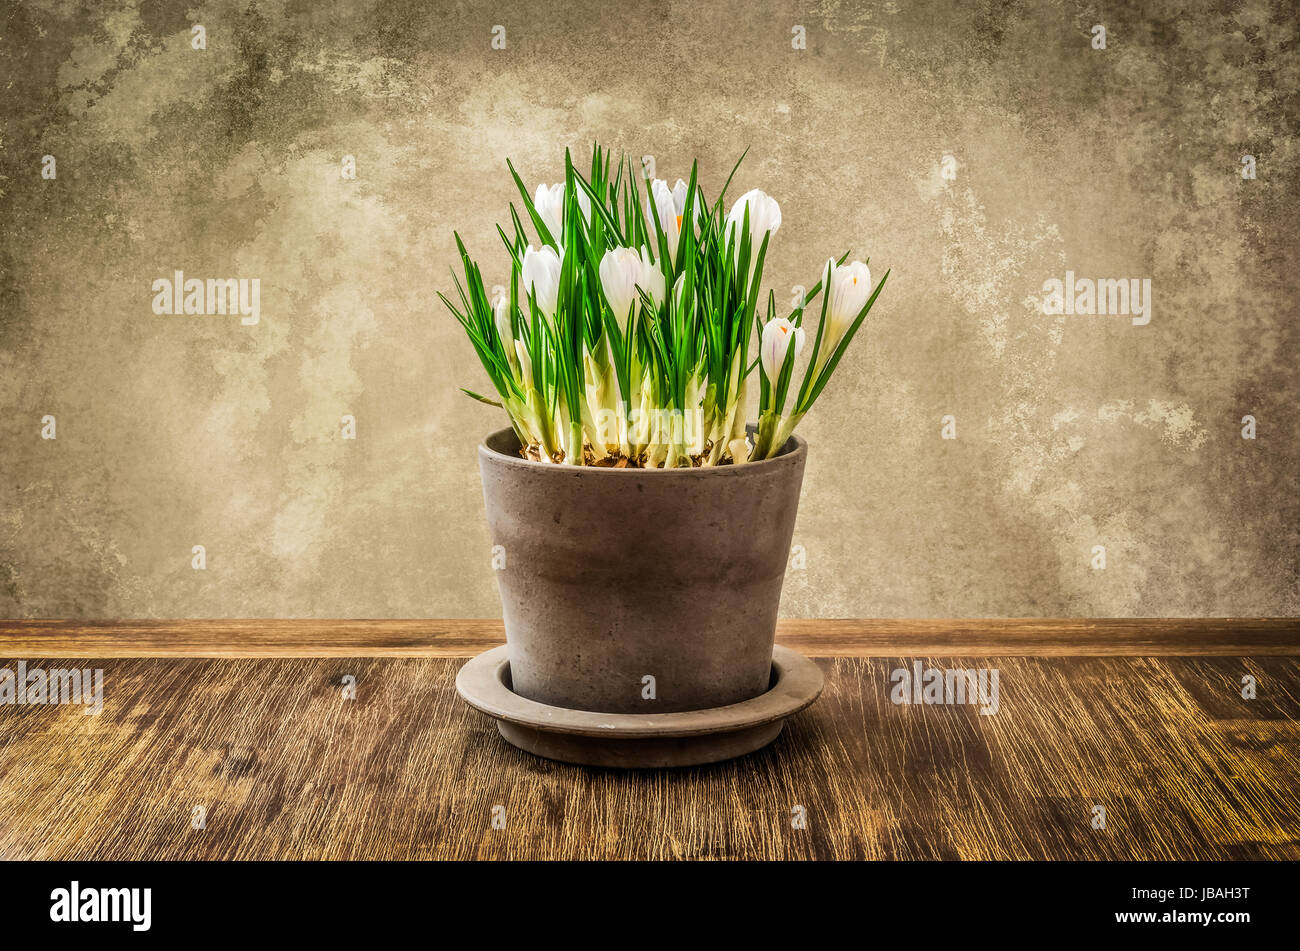 Detail of crocus flower in pot with textured wall background, vintage style Stock Photo